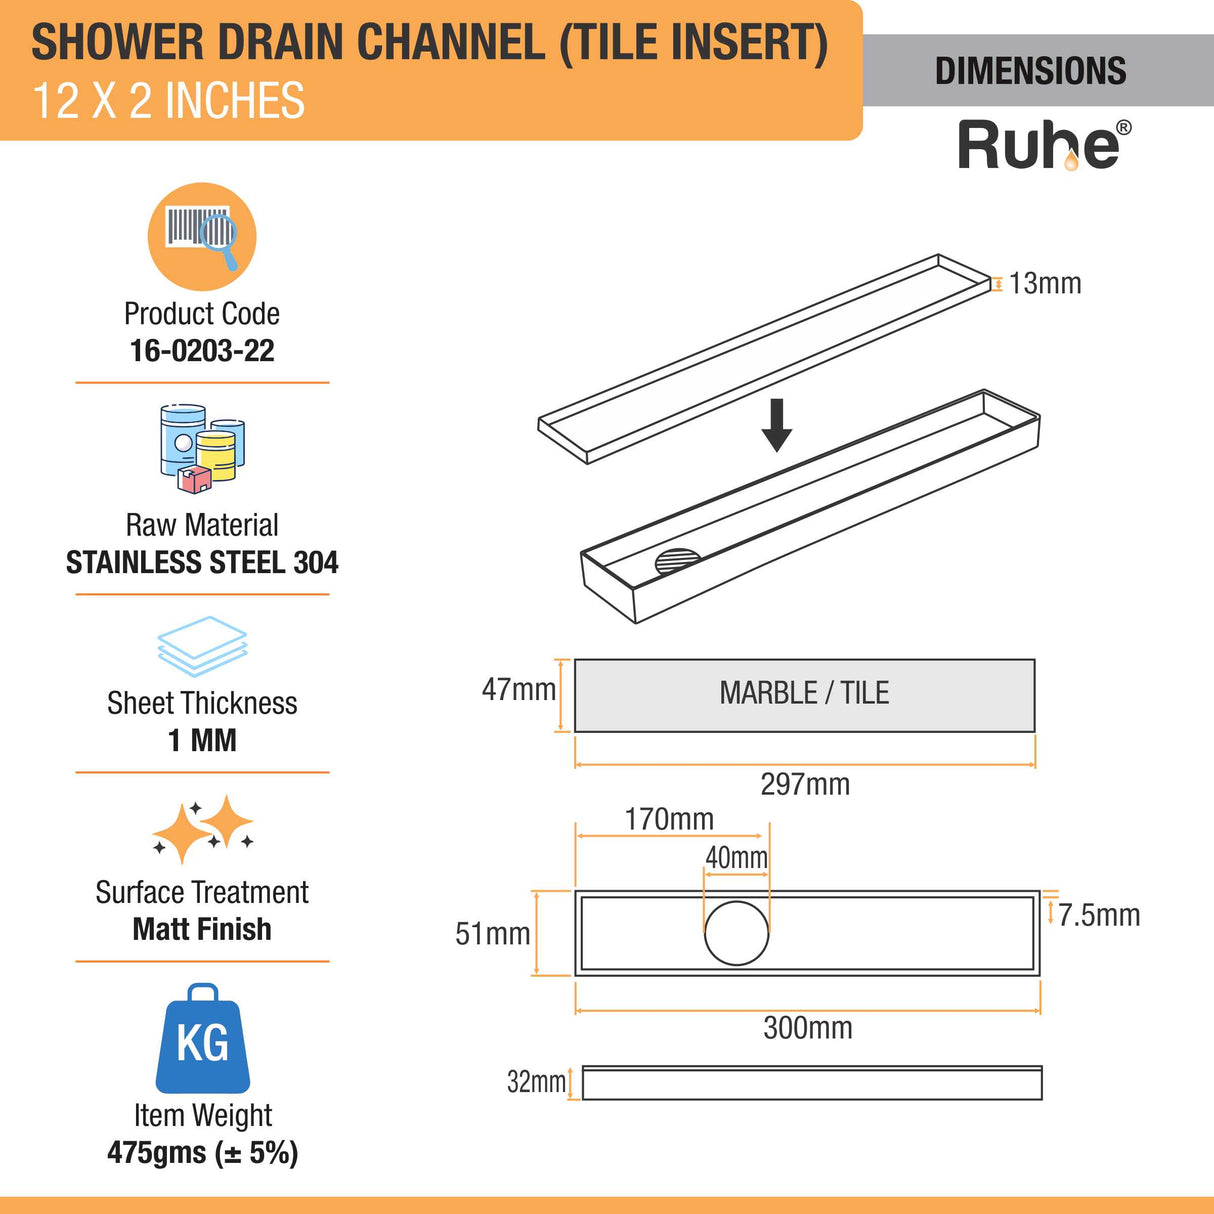 Tile Insert Shower Drain Channel (12 x 2 Inches) (304 Grade) dimensions and size